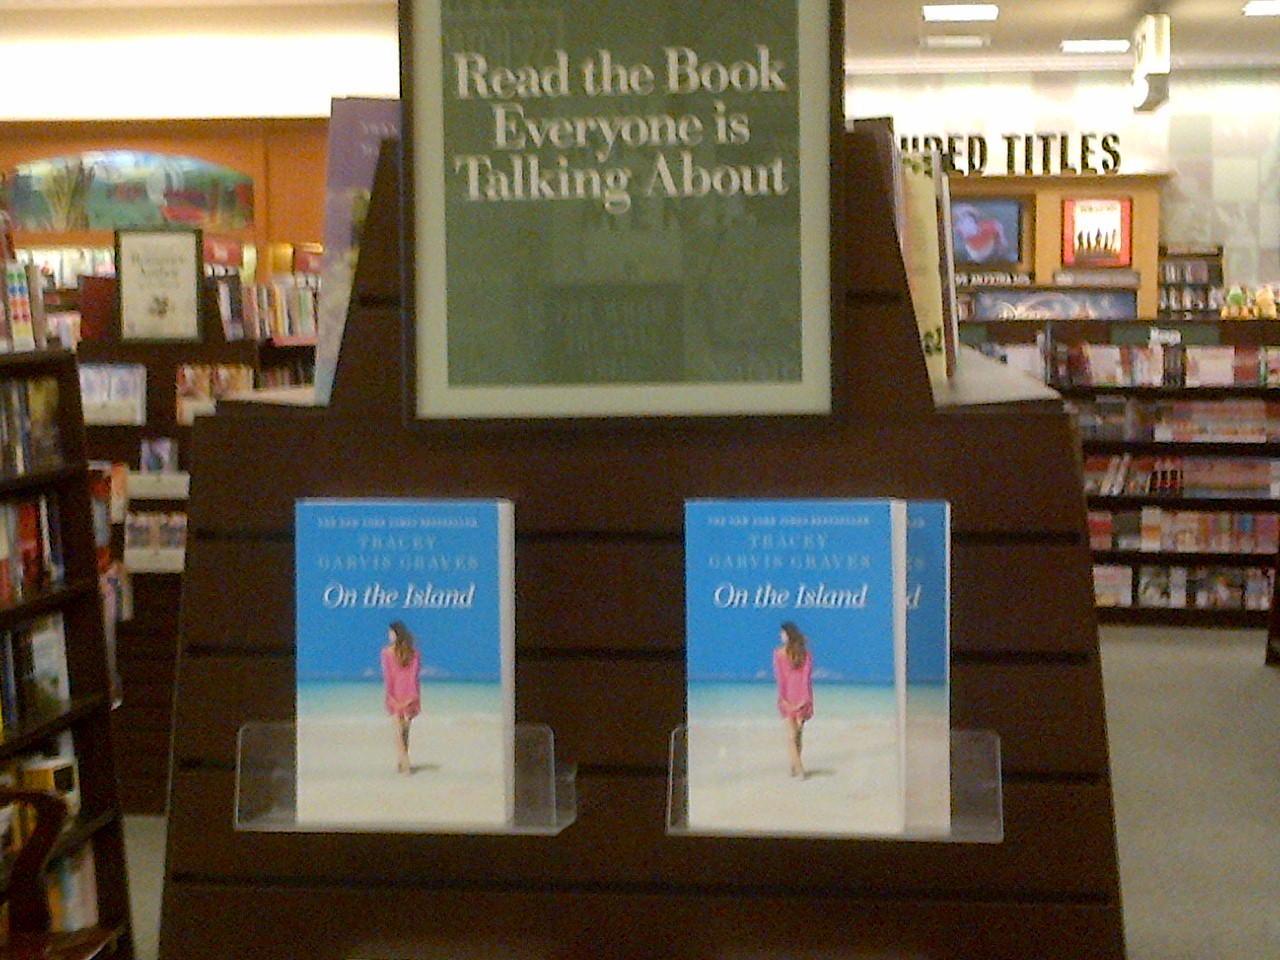 This picture is from the Barnes & Noble at Jordan Creek Mall in West Des